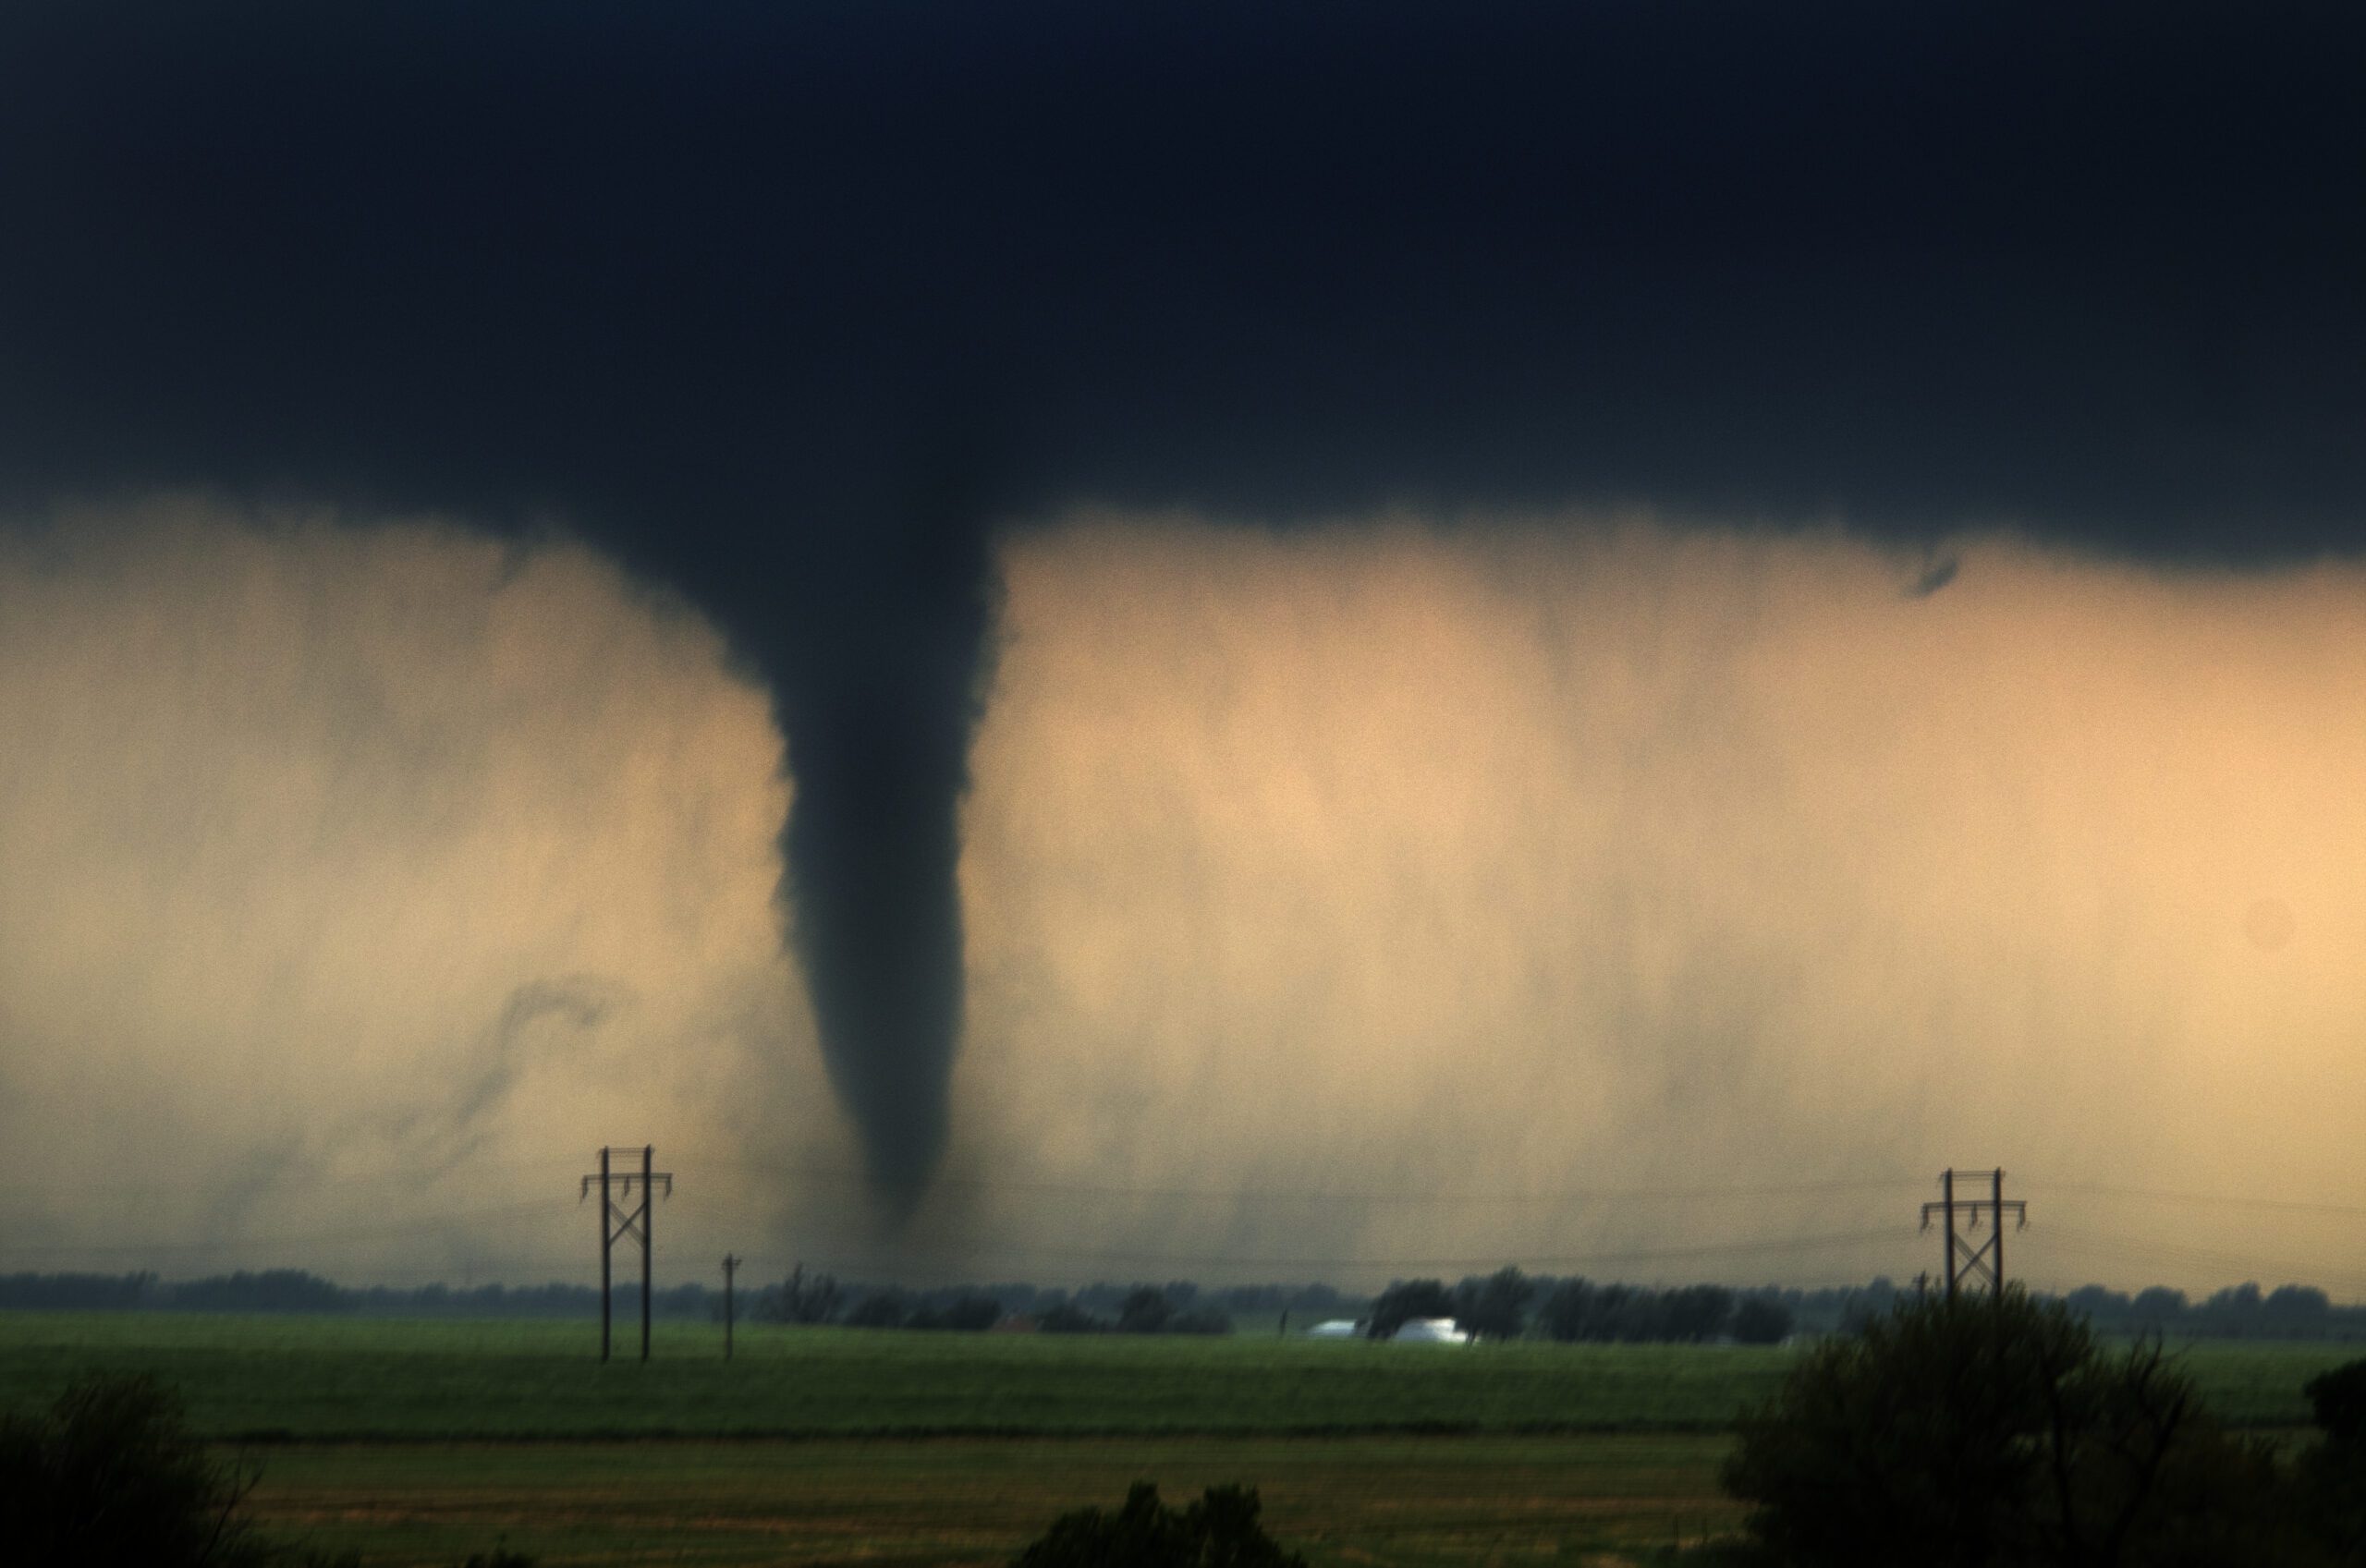 A tornado in the distance